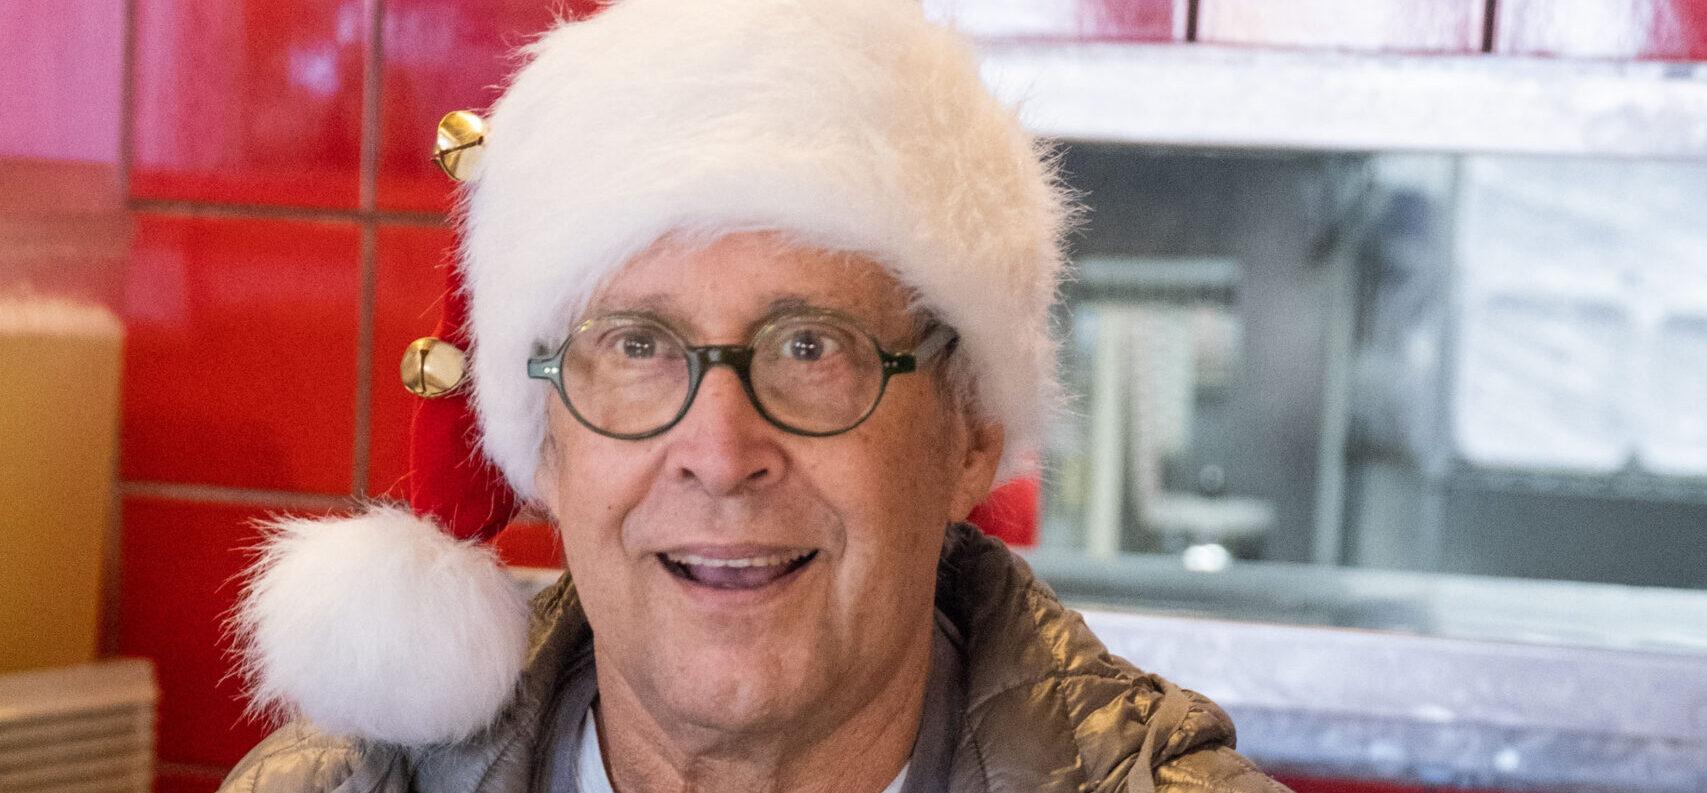 Chevy Chase Makes Special Appearance At Family’s ‘Christmas Vacation’ House